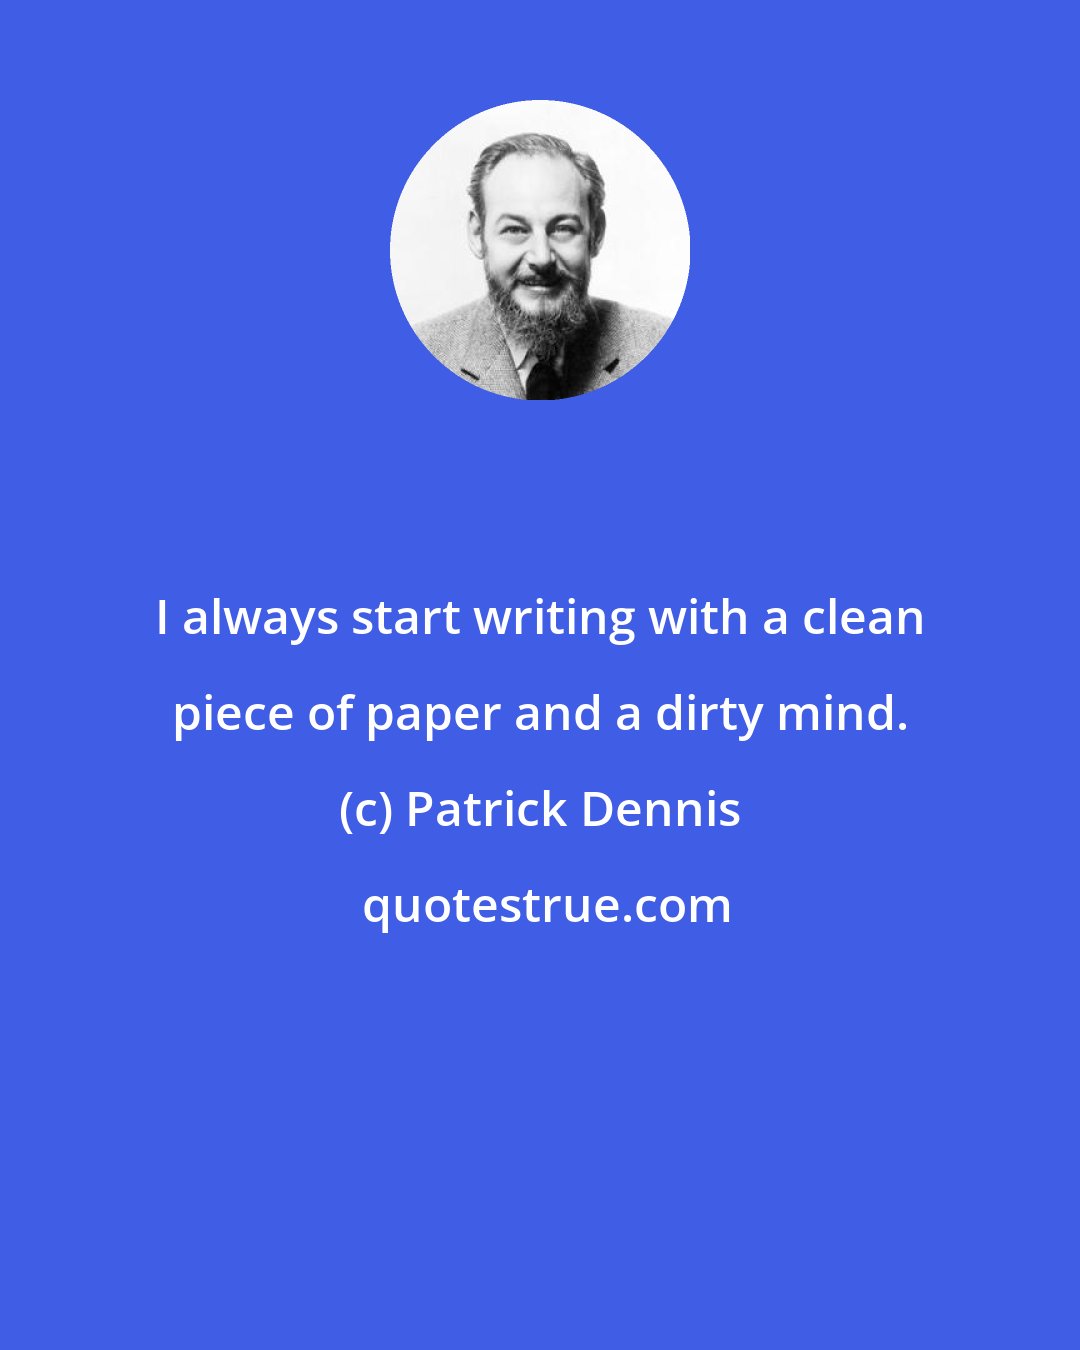 Patrick Dennis: I always start writing with a clean piece of paper and a dirty mind.